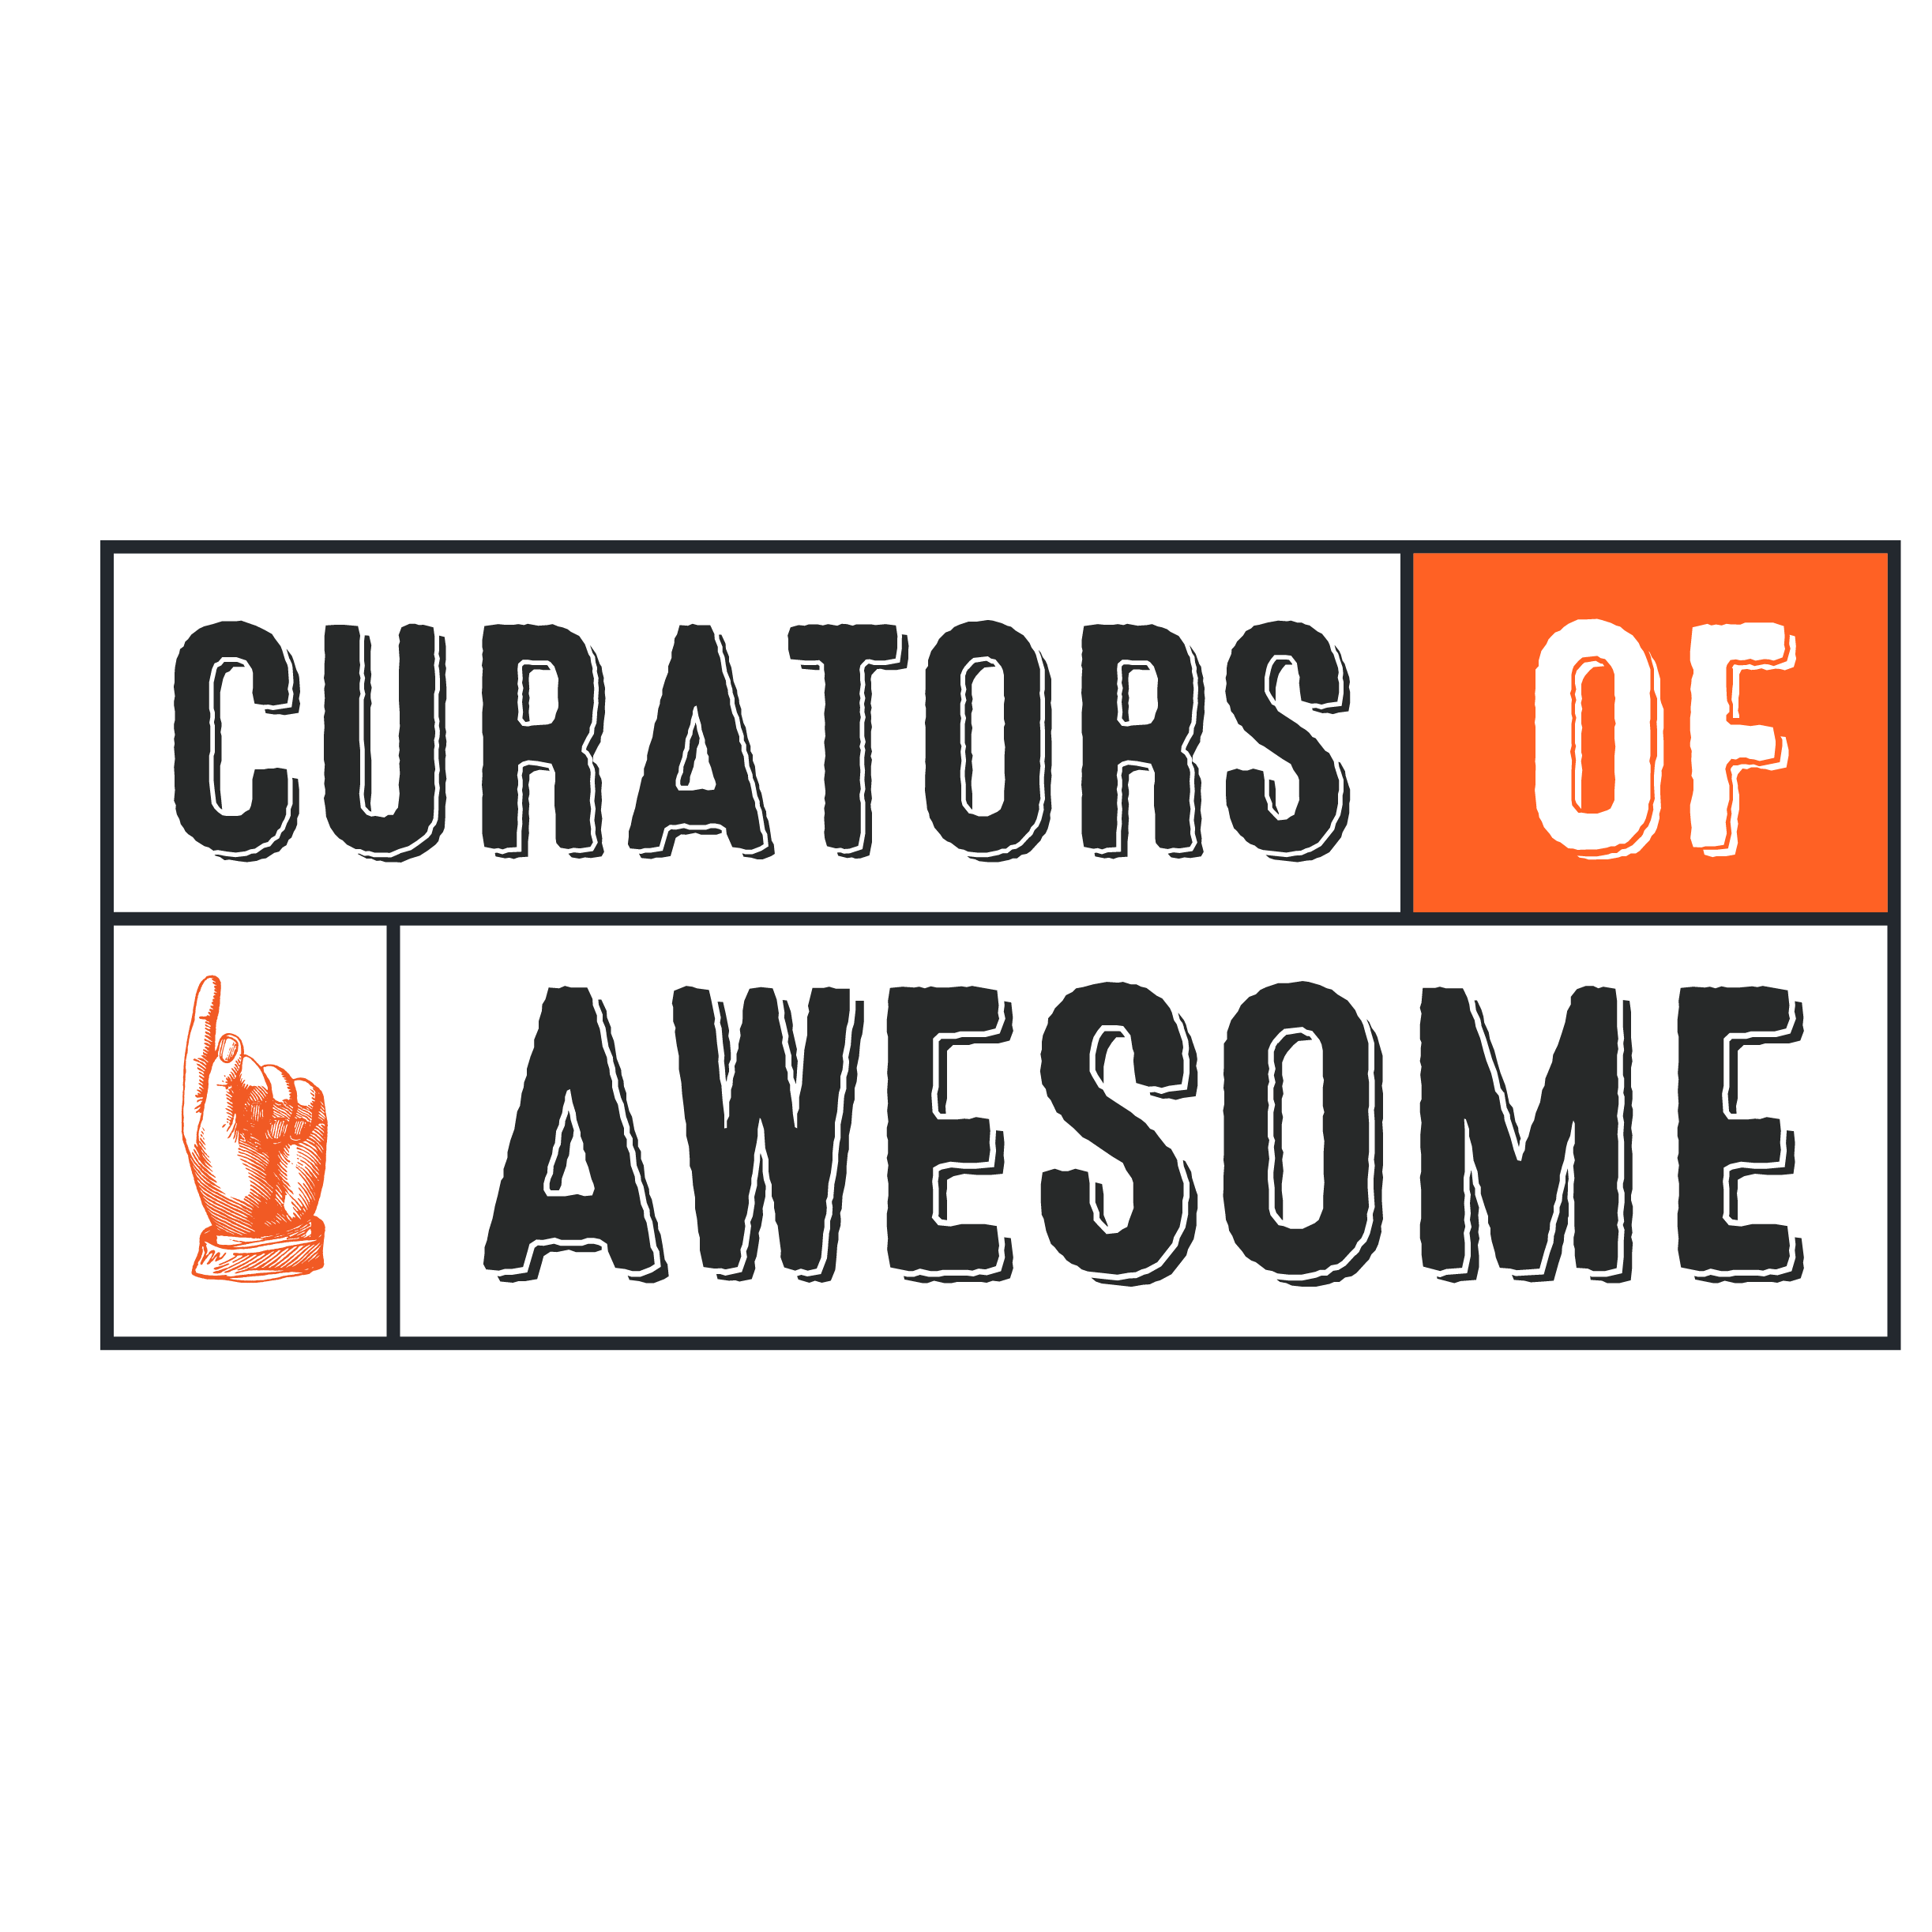 Content marketing and events for brands that aspire to be awesome. Co-founded by the creators of Smarta, @shaawasmund and @contentmatt